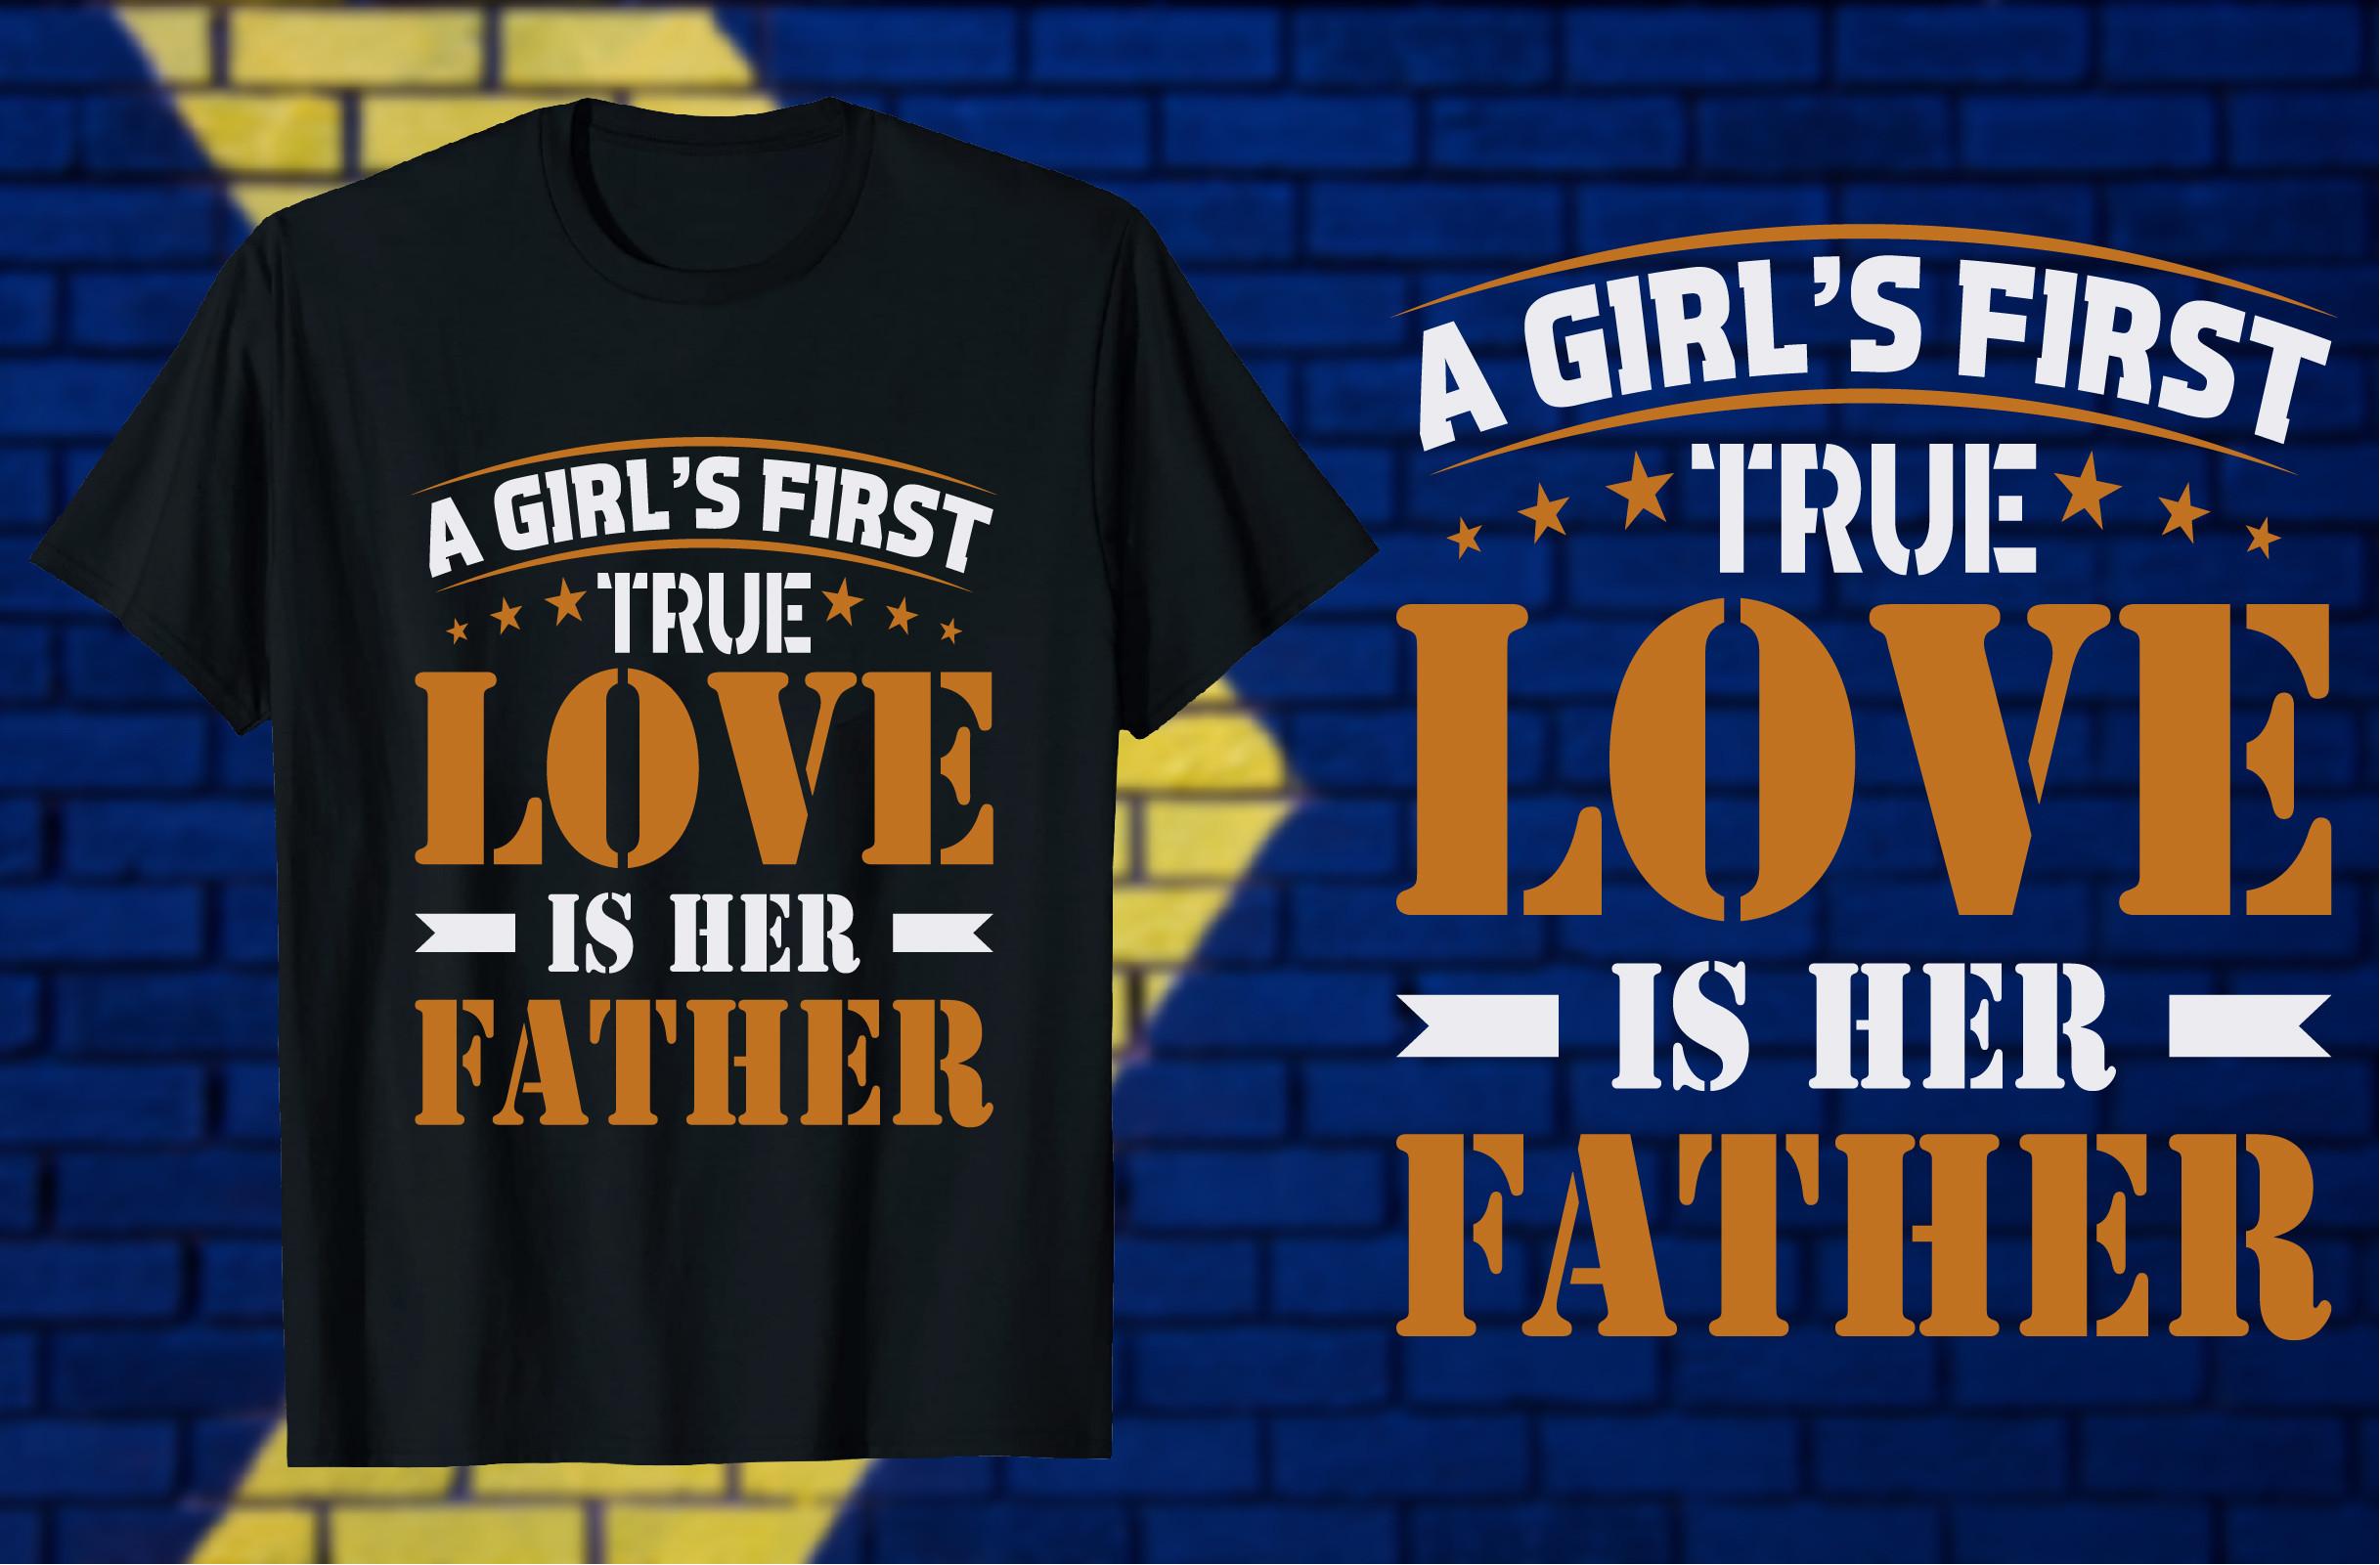 A Girl's True Love is Her Father